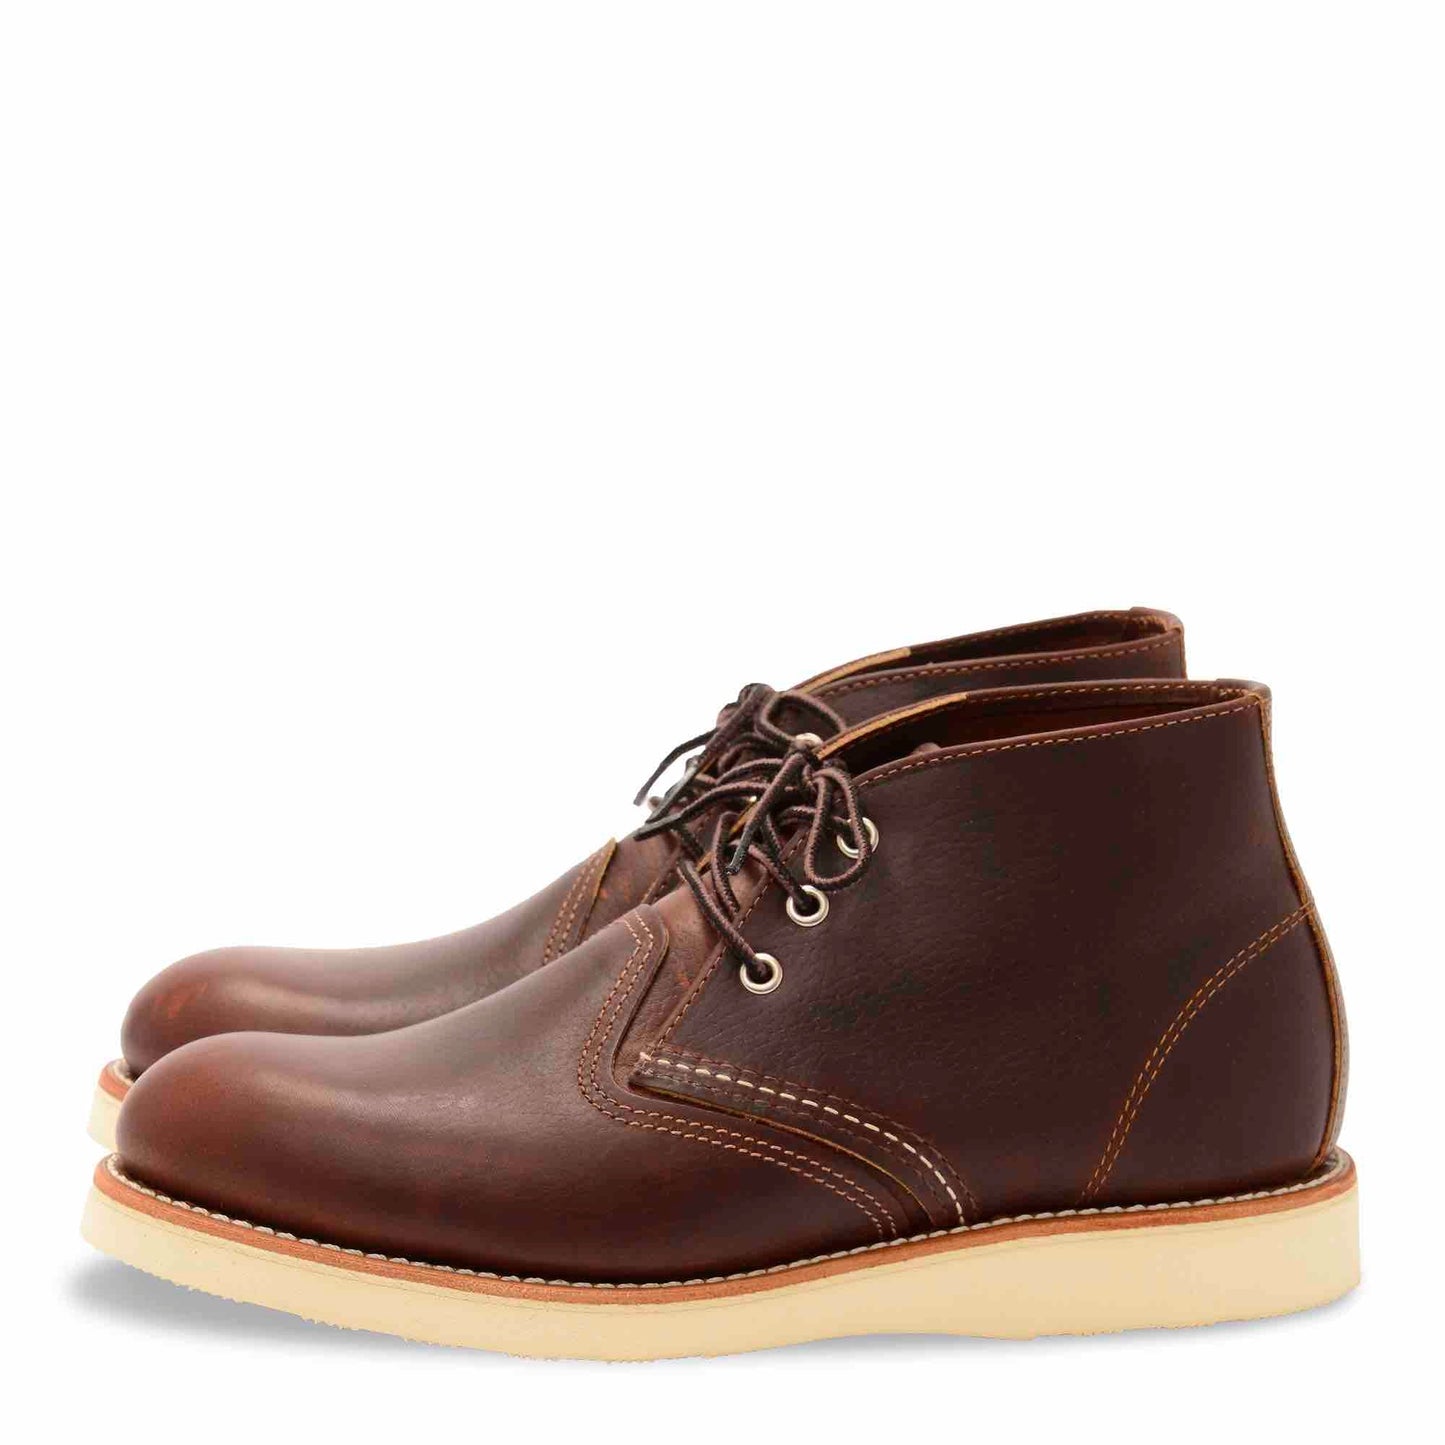 Red Wing - 3141 EE - Classic Chukka (Briar Oil Slick)